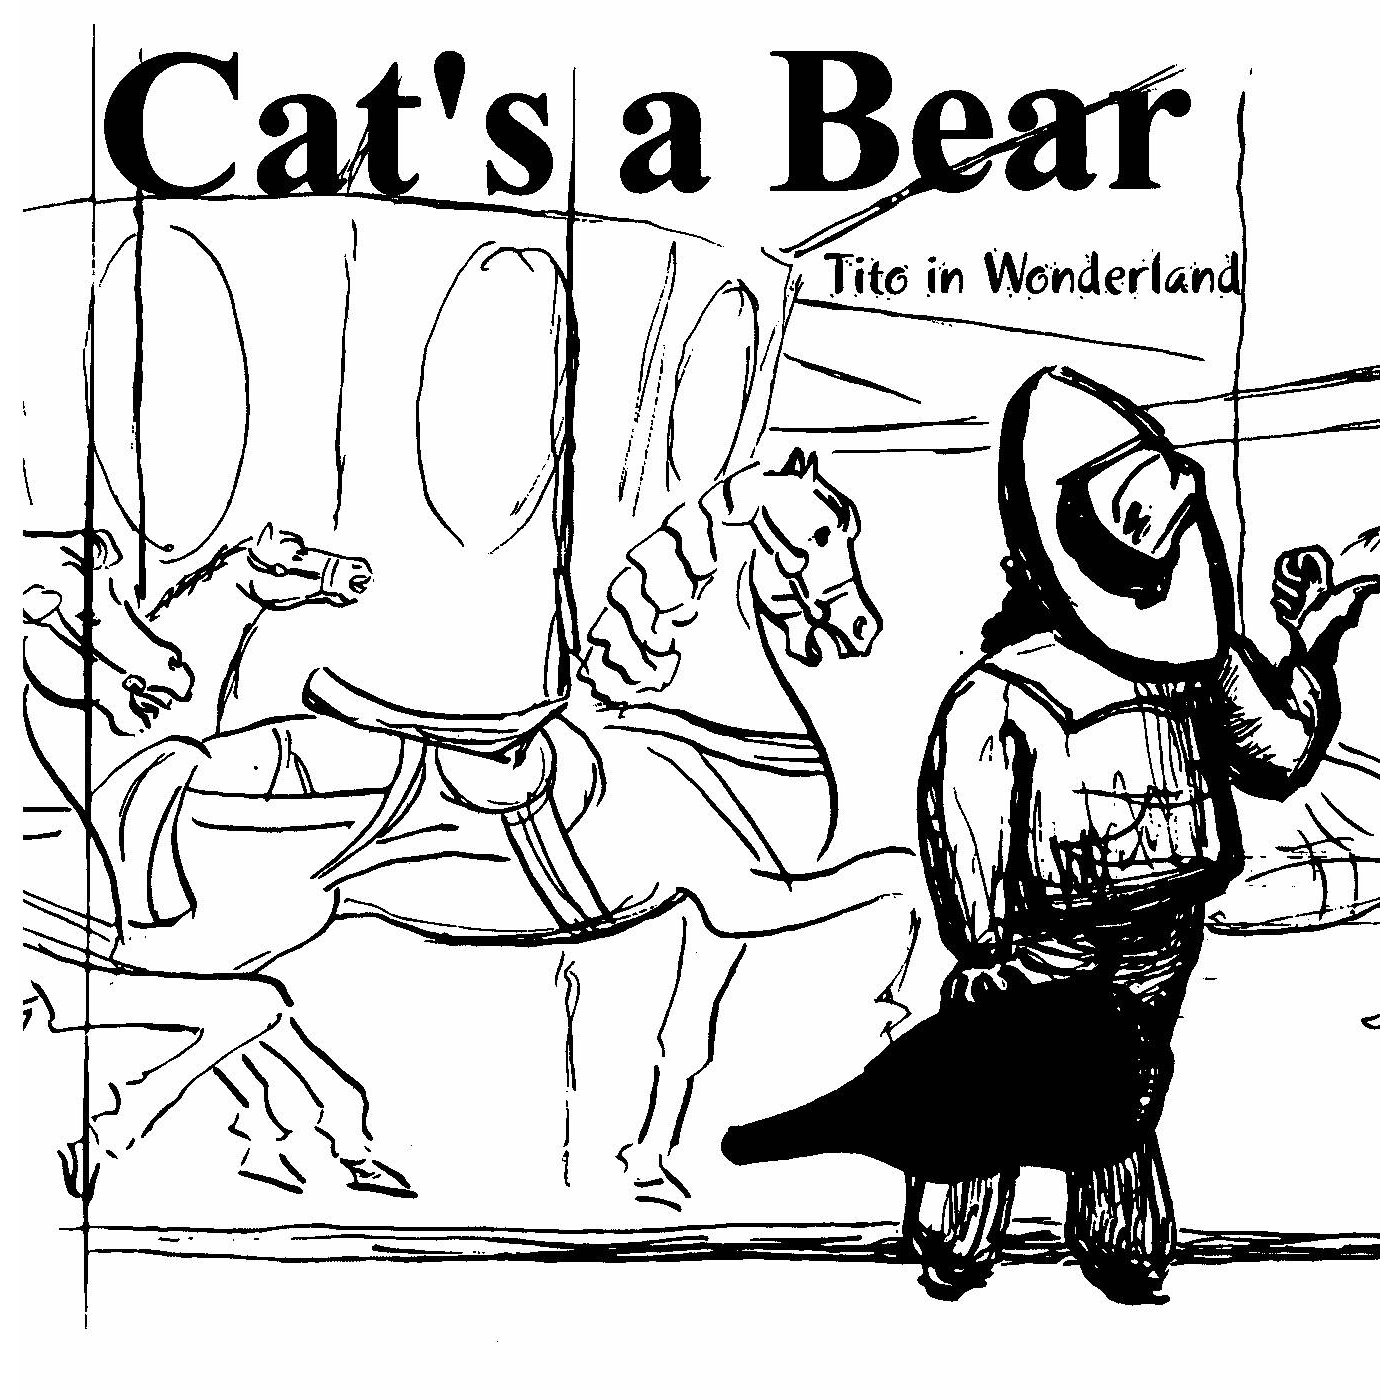 Cat's A Bear / Tito in Wonderland